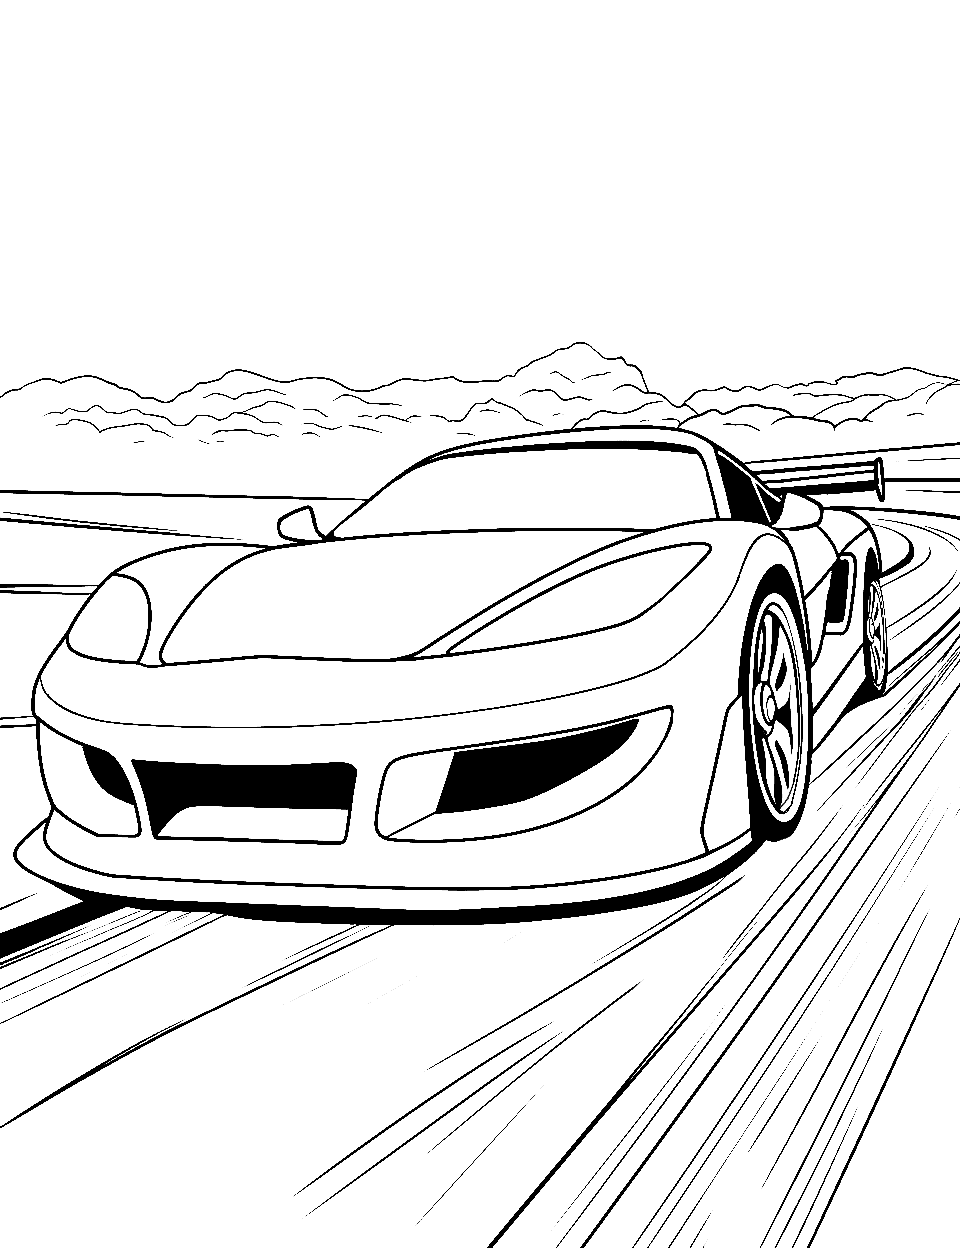 Race Track Rush Car Coloring Page - A car taking a sharp turn on a race track.